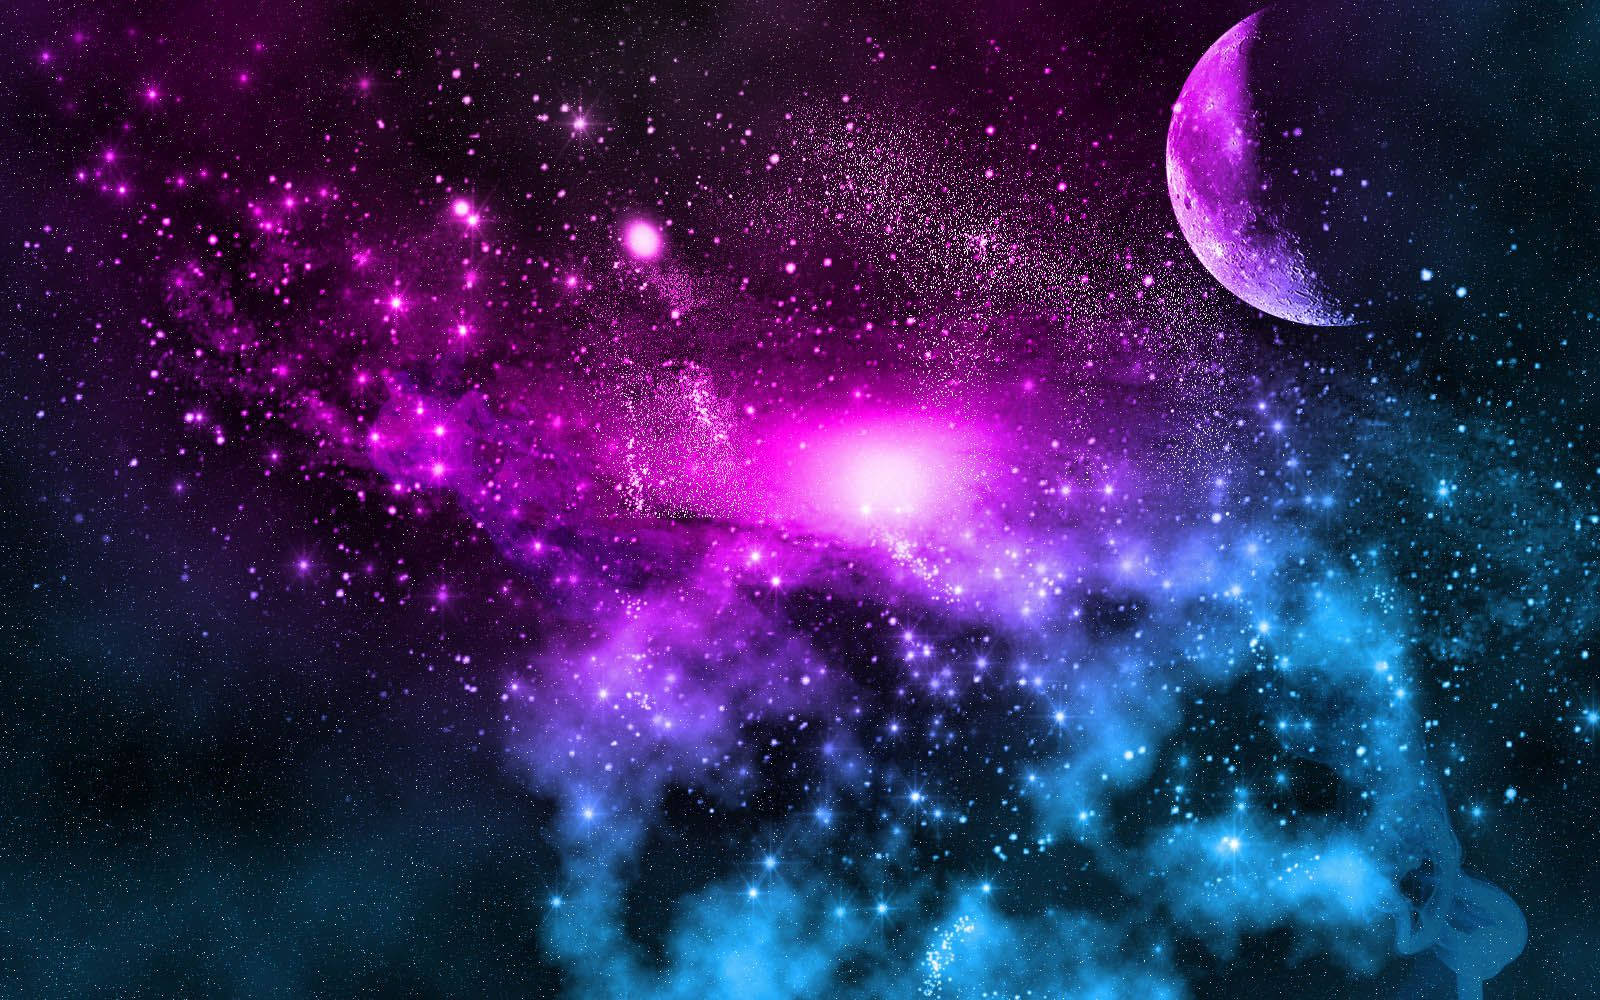 Moon in Colorful Galaxy Wallpaper